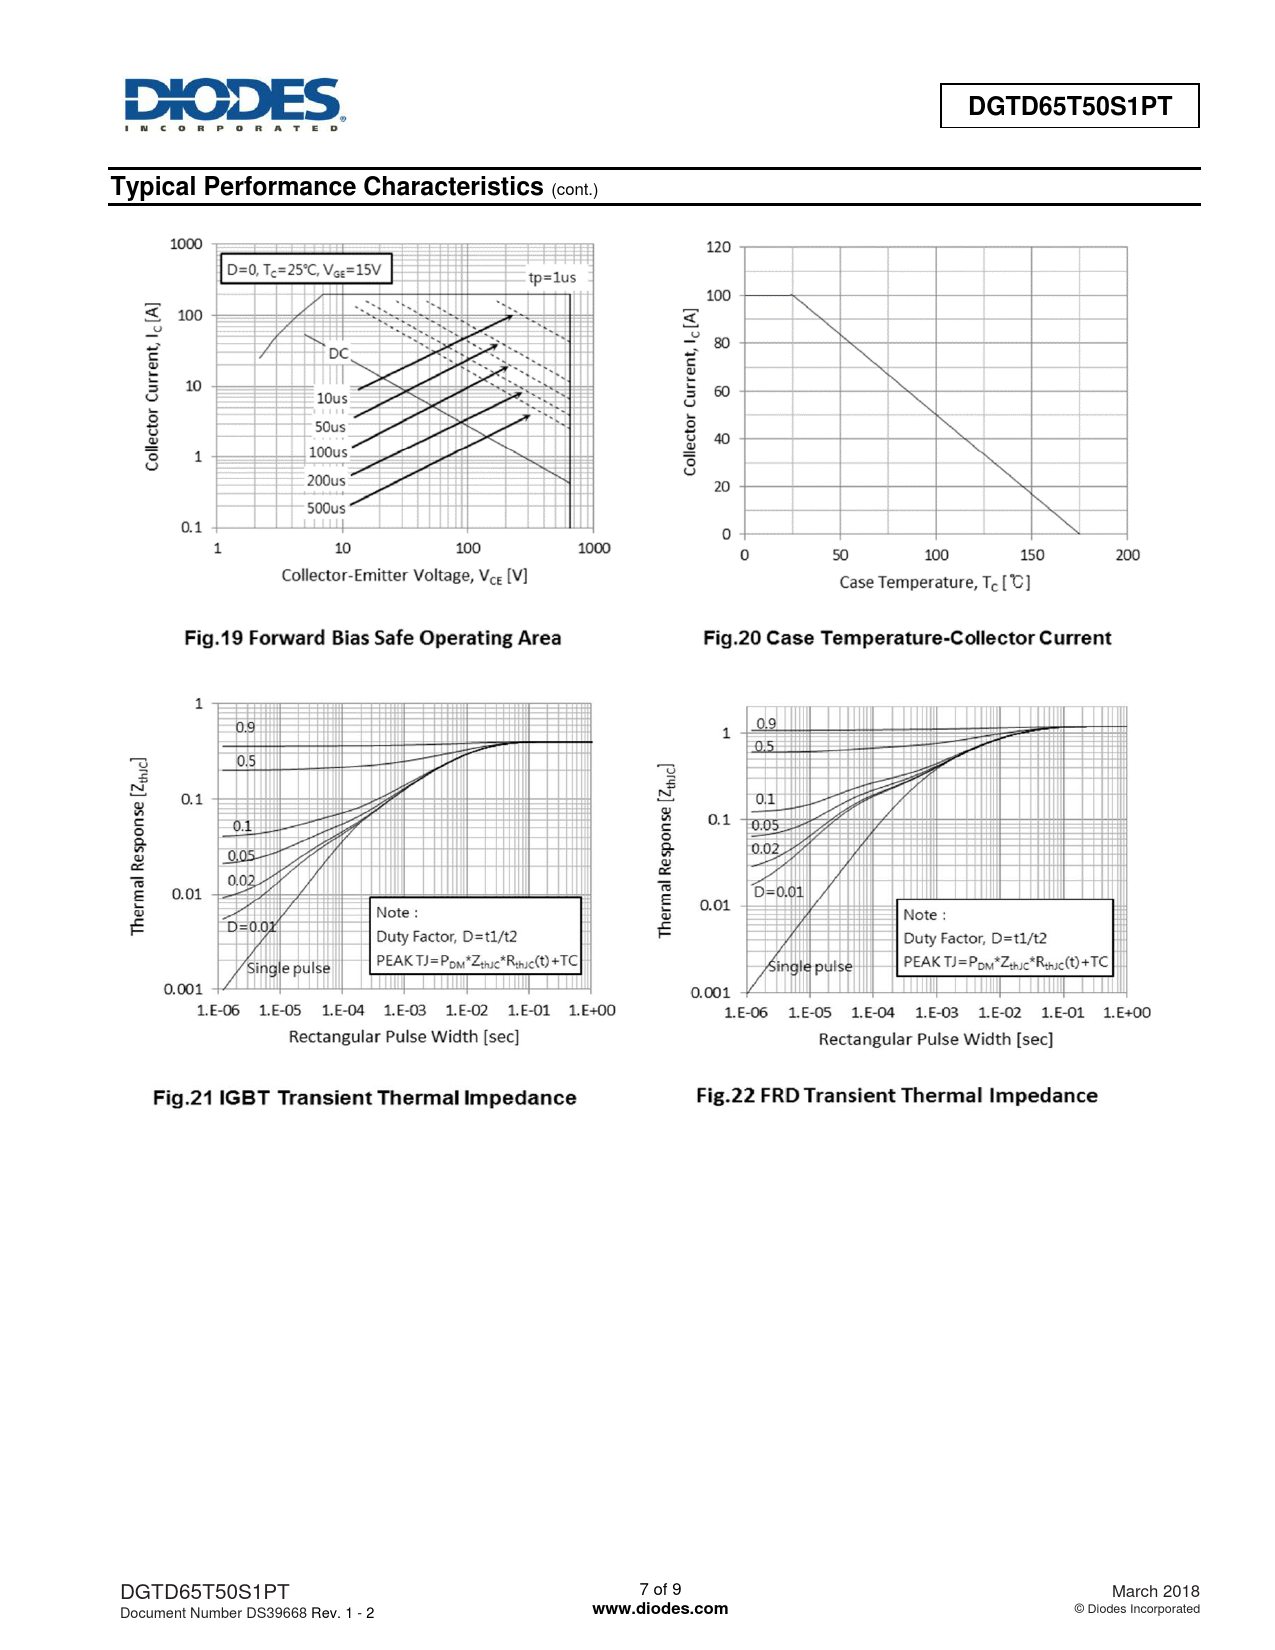 DGTD65T50S1PT Typical Performance Characteristics www.diodes.com